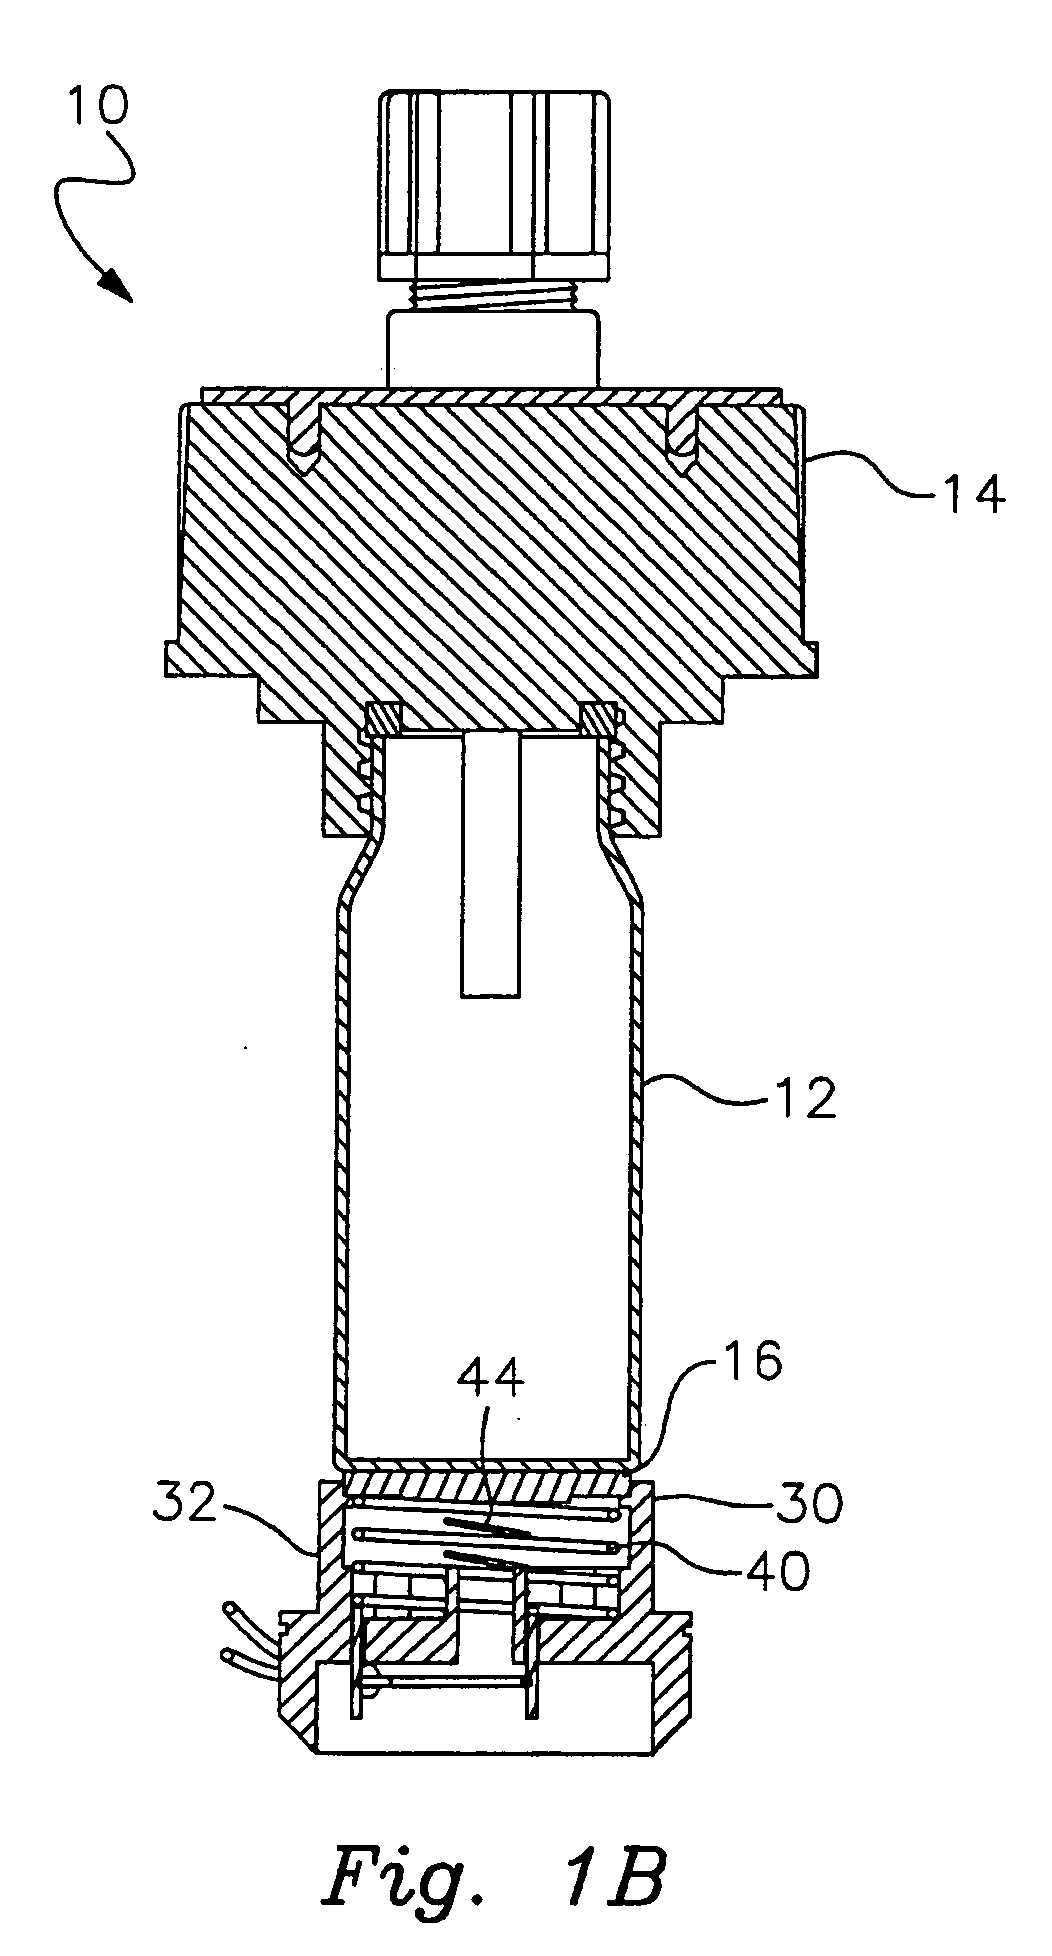 Turbidimeter with ultrasonically cleaned components